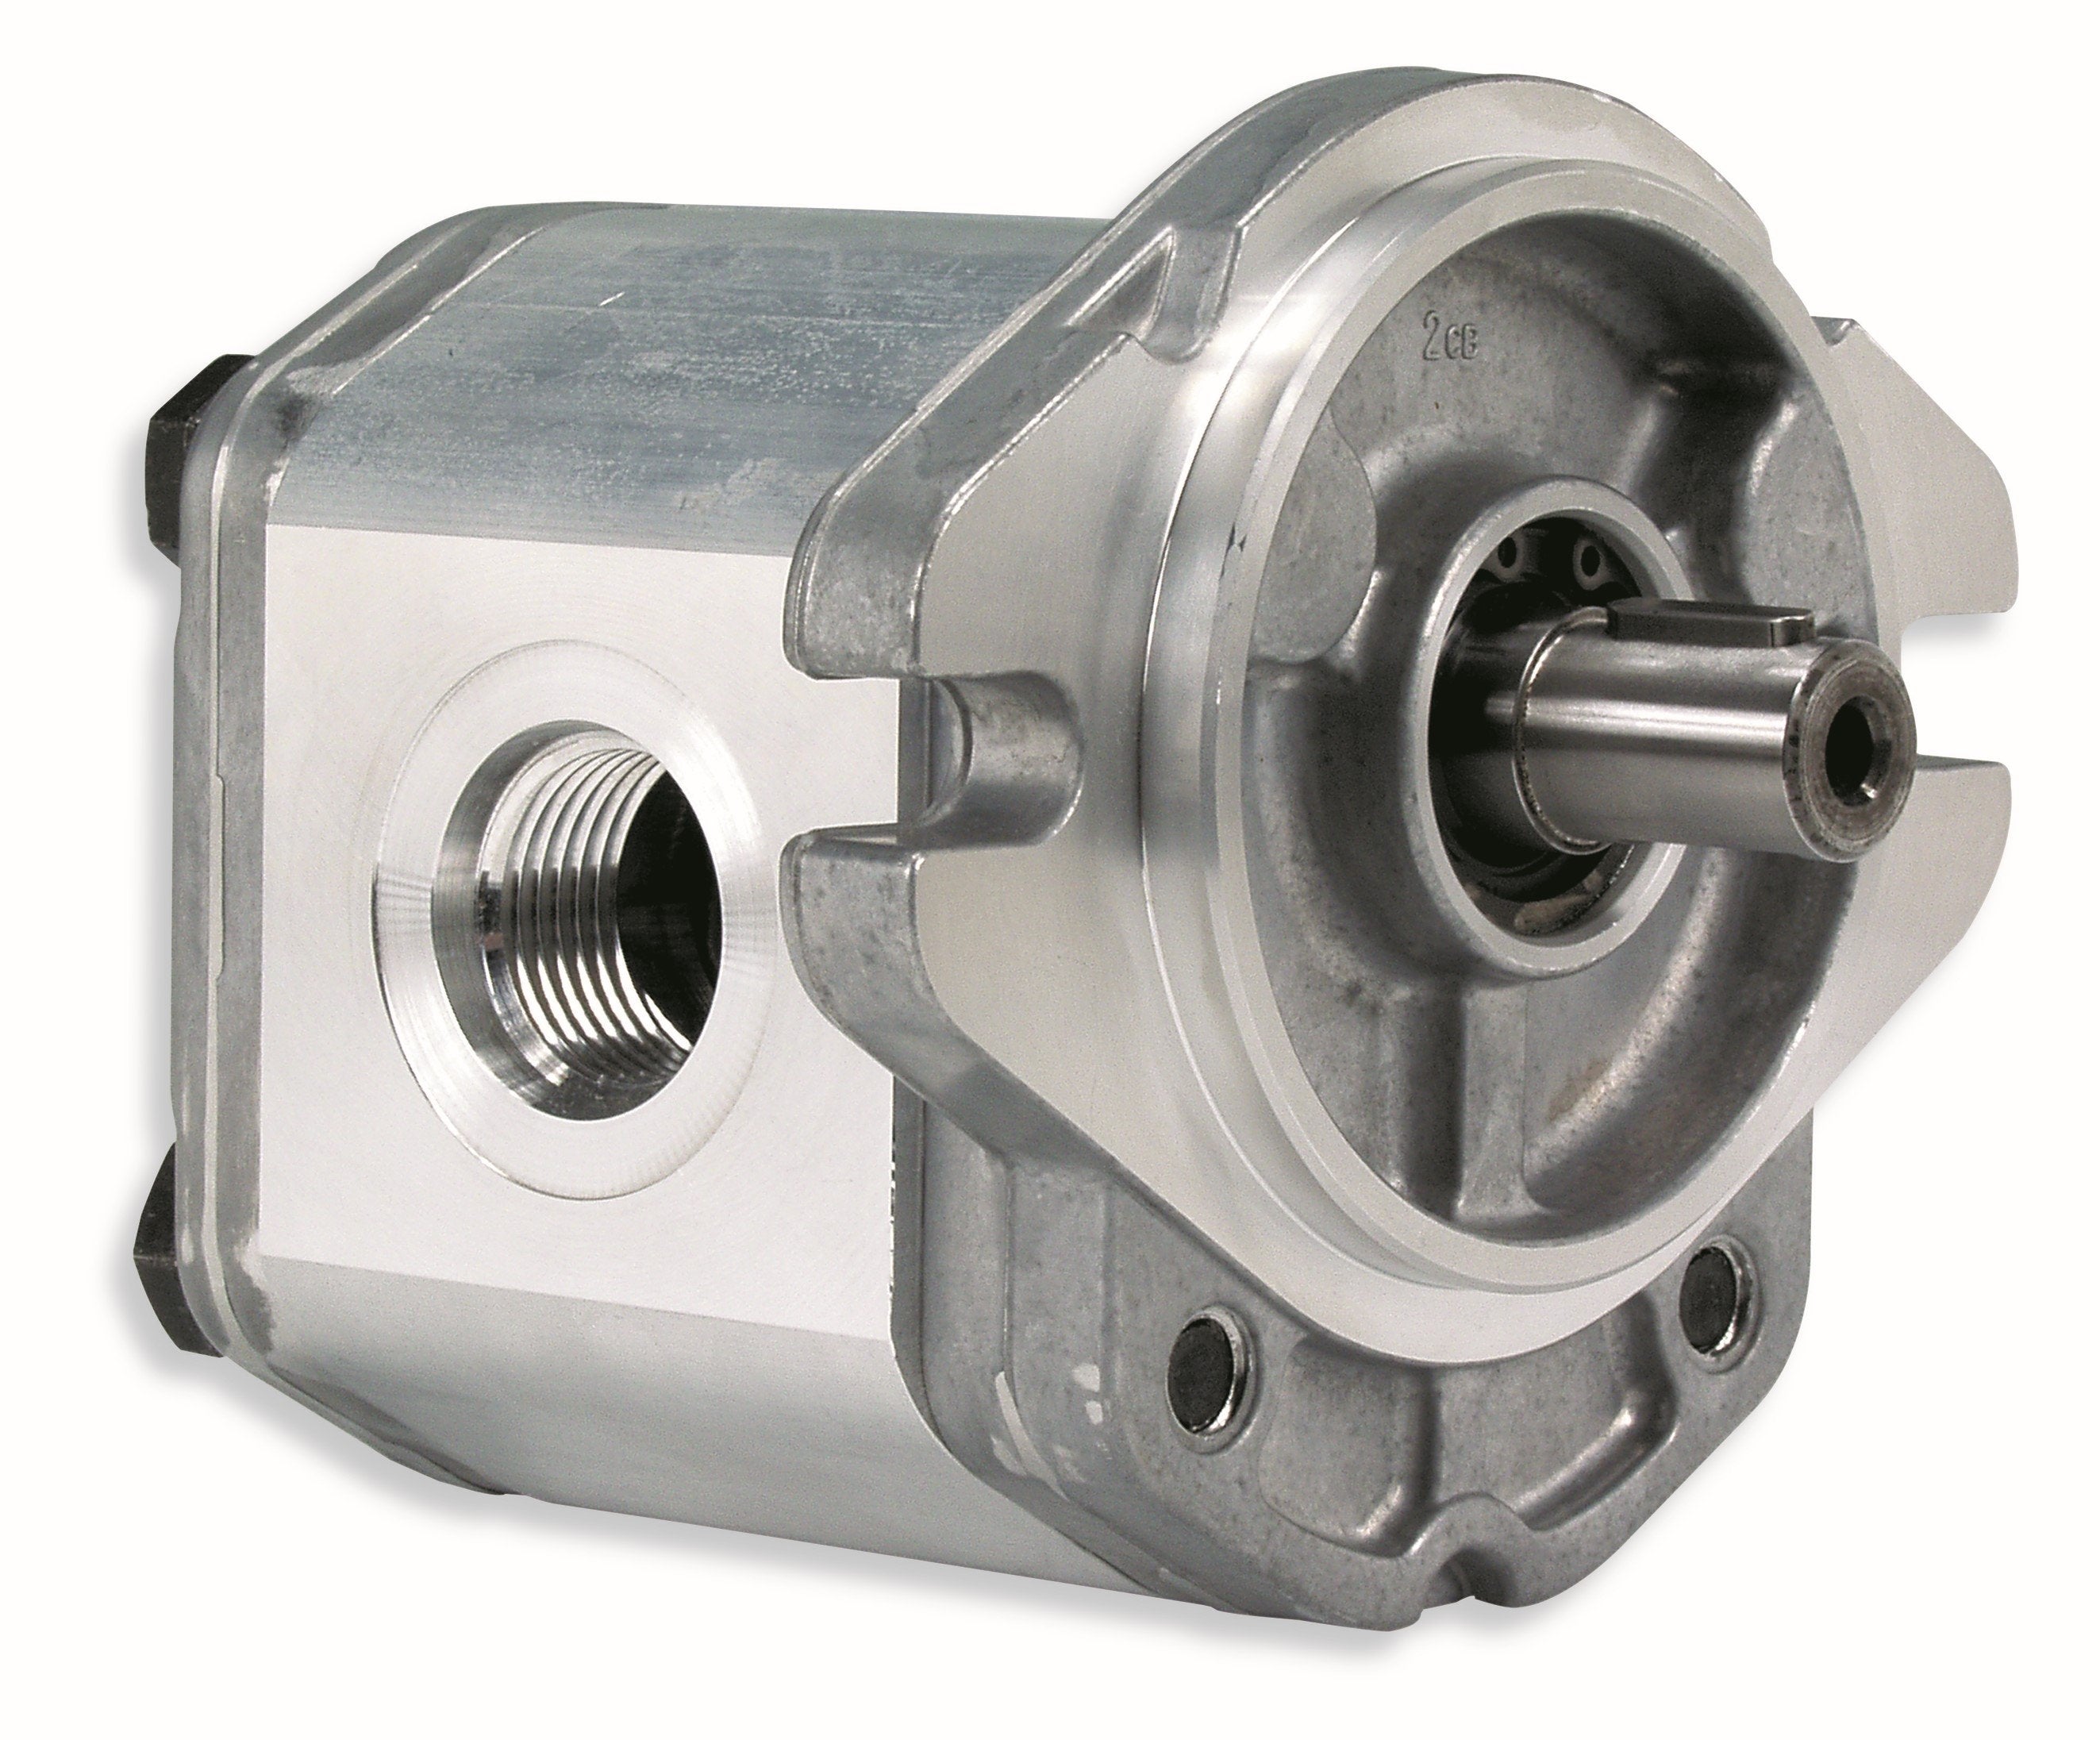 GHM3A-R-80-S1-FA-E4 : Marzocchi Gear Motor, Bidirectional, 52cc, 3335psi rated, 2500RPM, 1.25" #20 SAE ports, 13T 16/32DP Splined Shaft